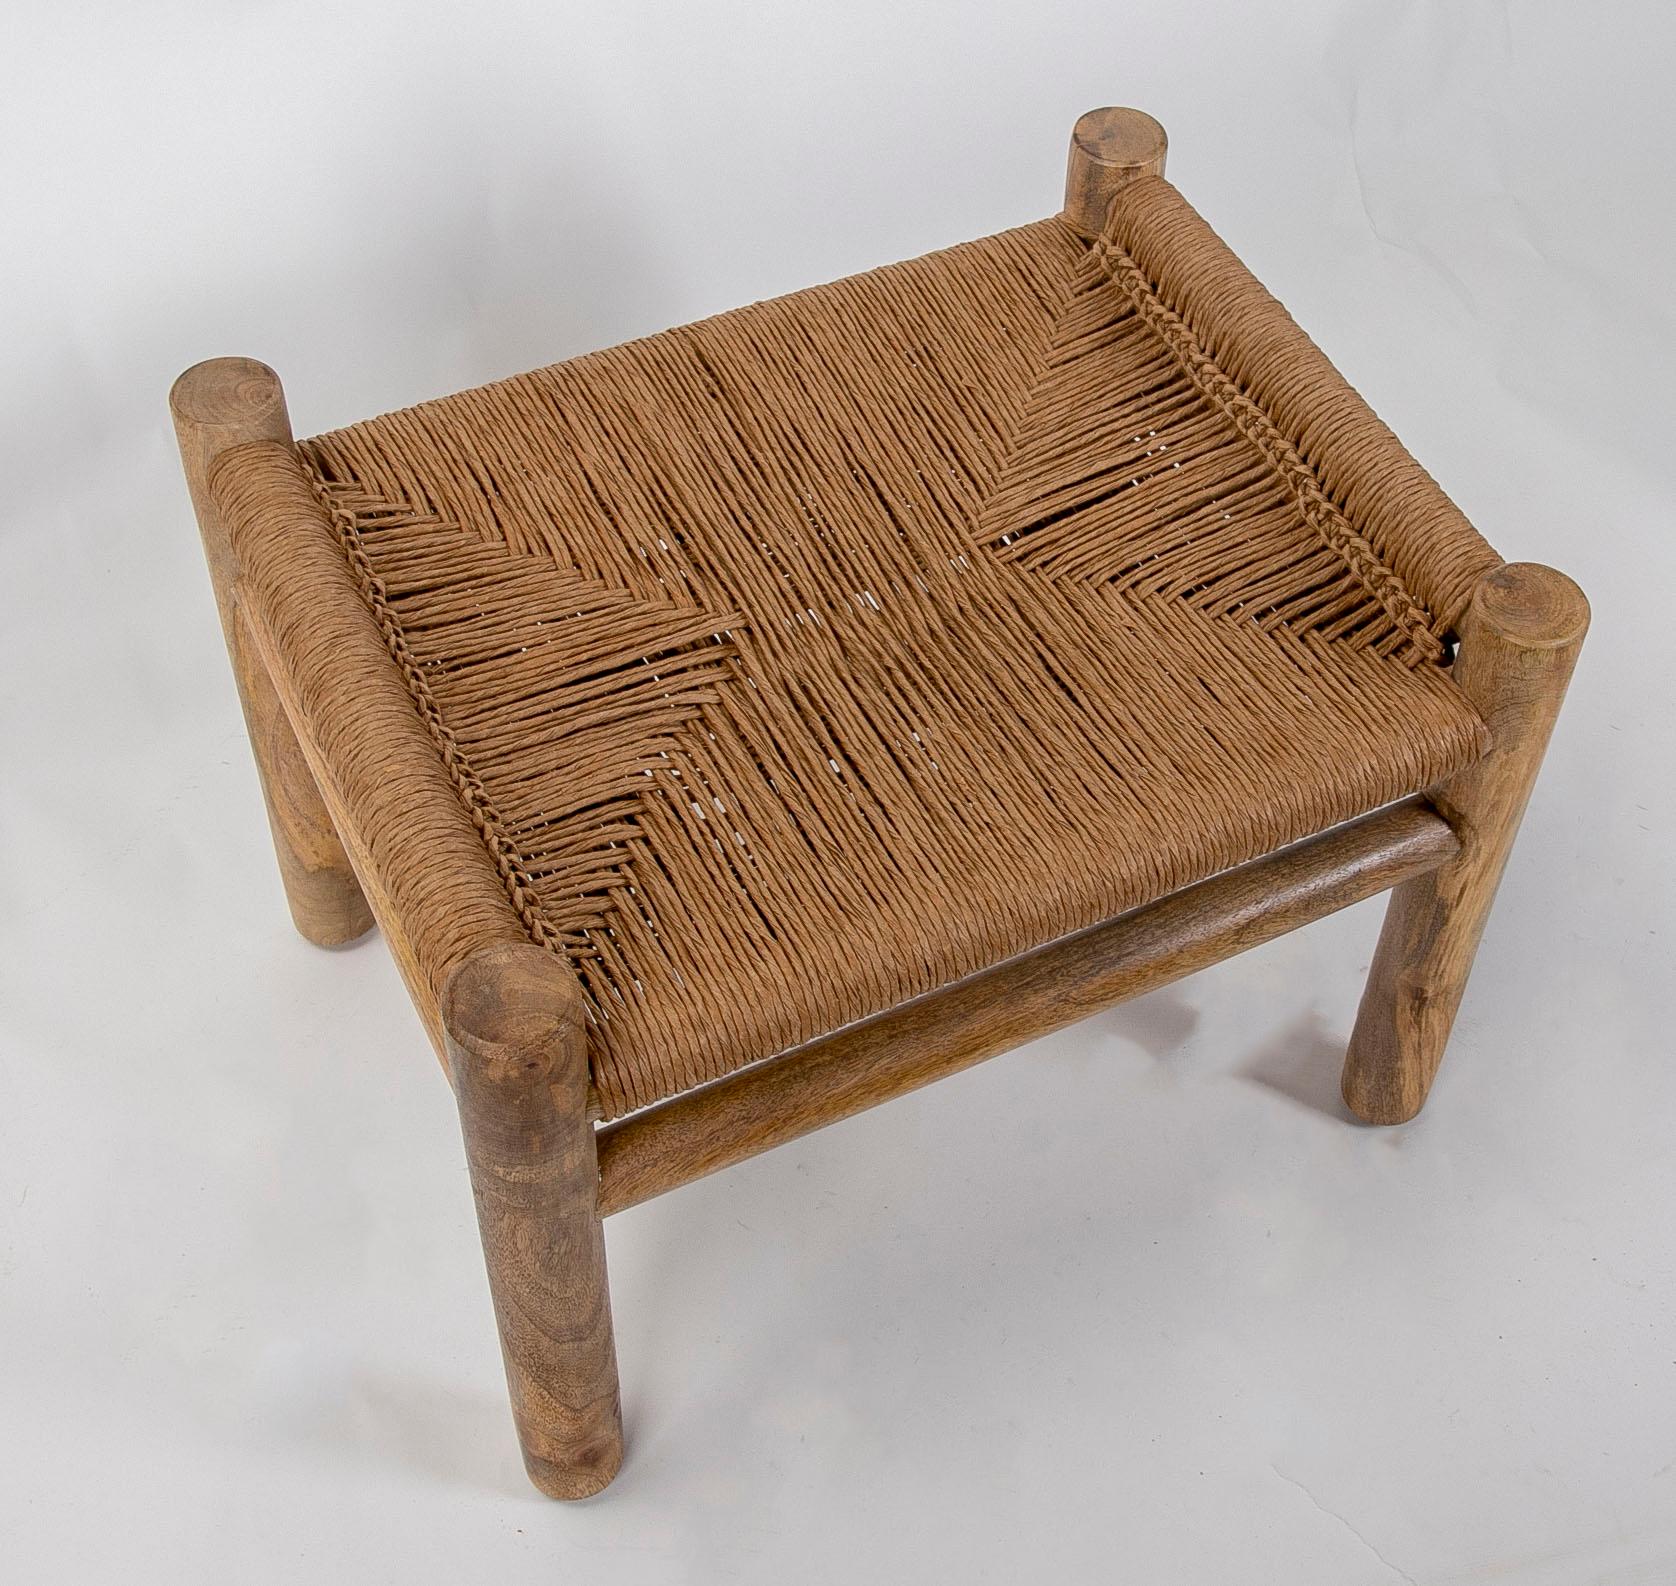 Wooden Stool with Hand-Braided Rope Seat For Sale 2